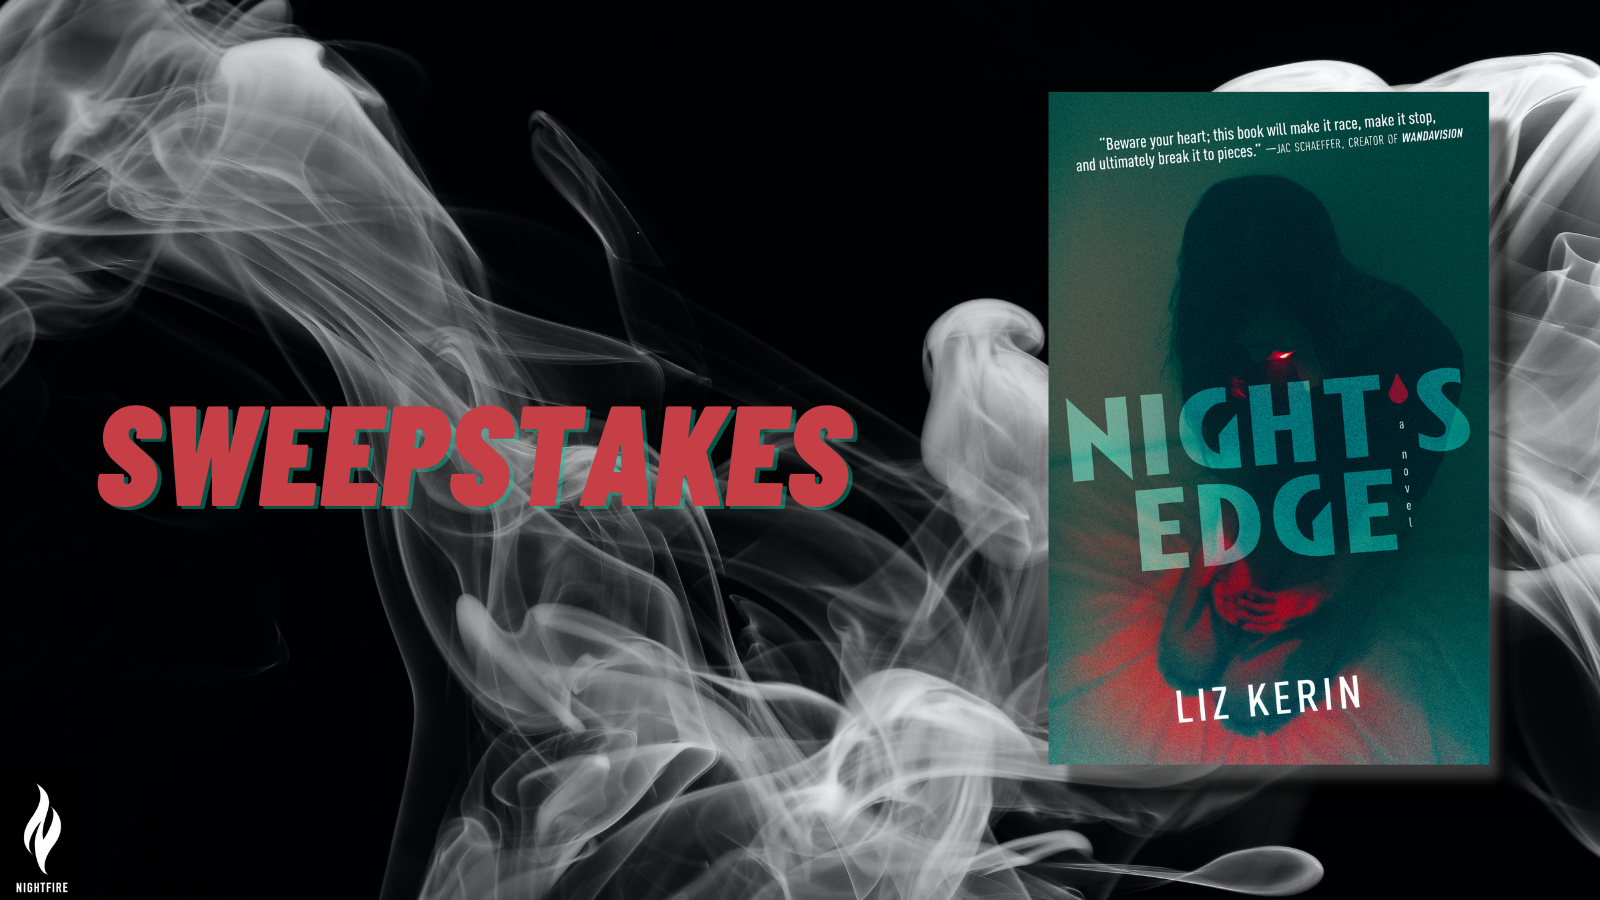 Night's Edge Sweepstakes Rules - 176